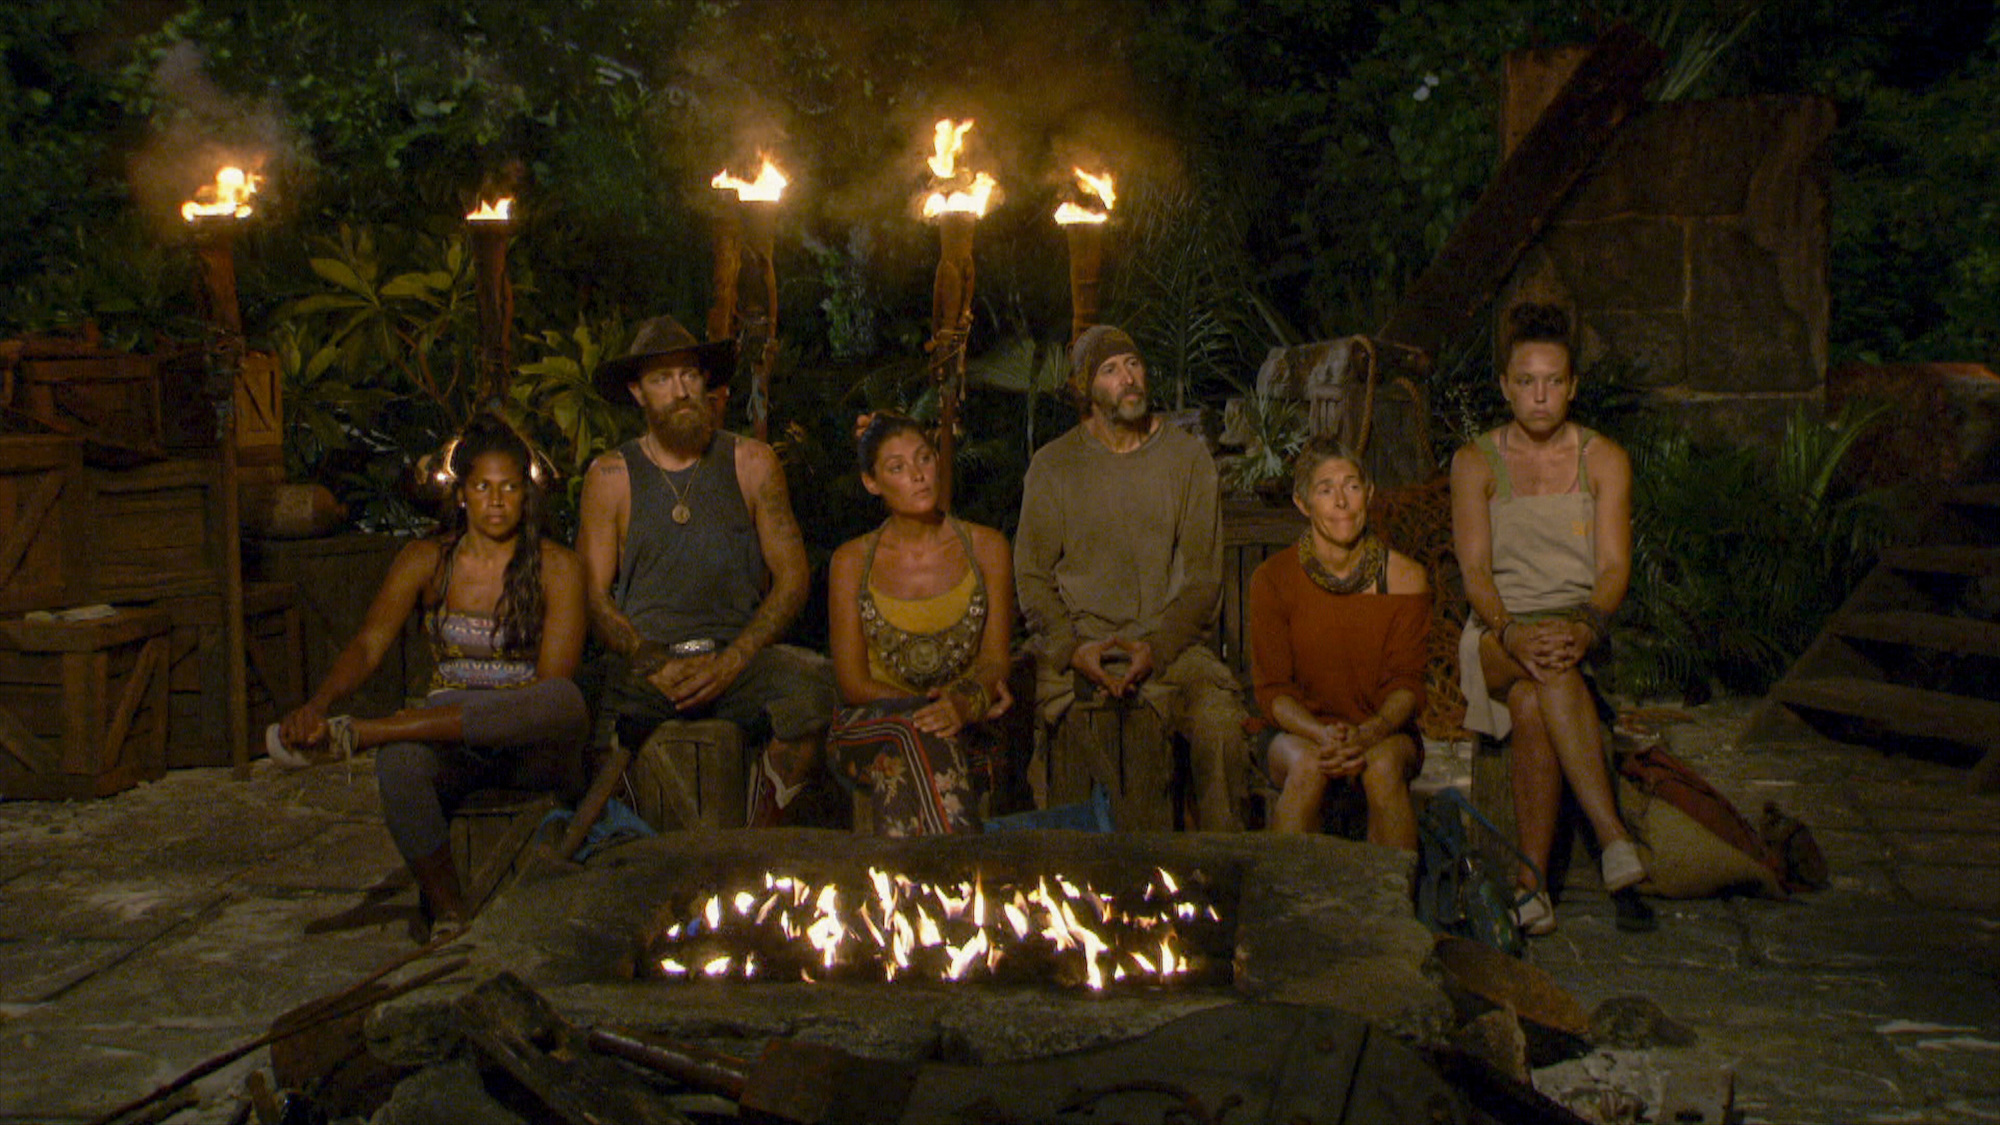 Natalie Anderson, Ben Driebergen, Michele Fitzgerald, Tony Vlachos, Denise Stapley and Sarah Lacina sitting around a fire at Tribal Council on 'Survivor'